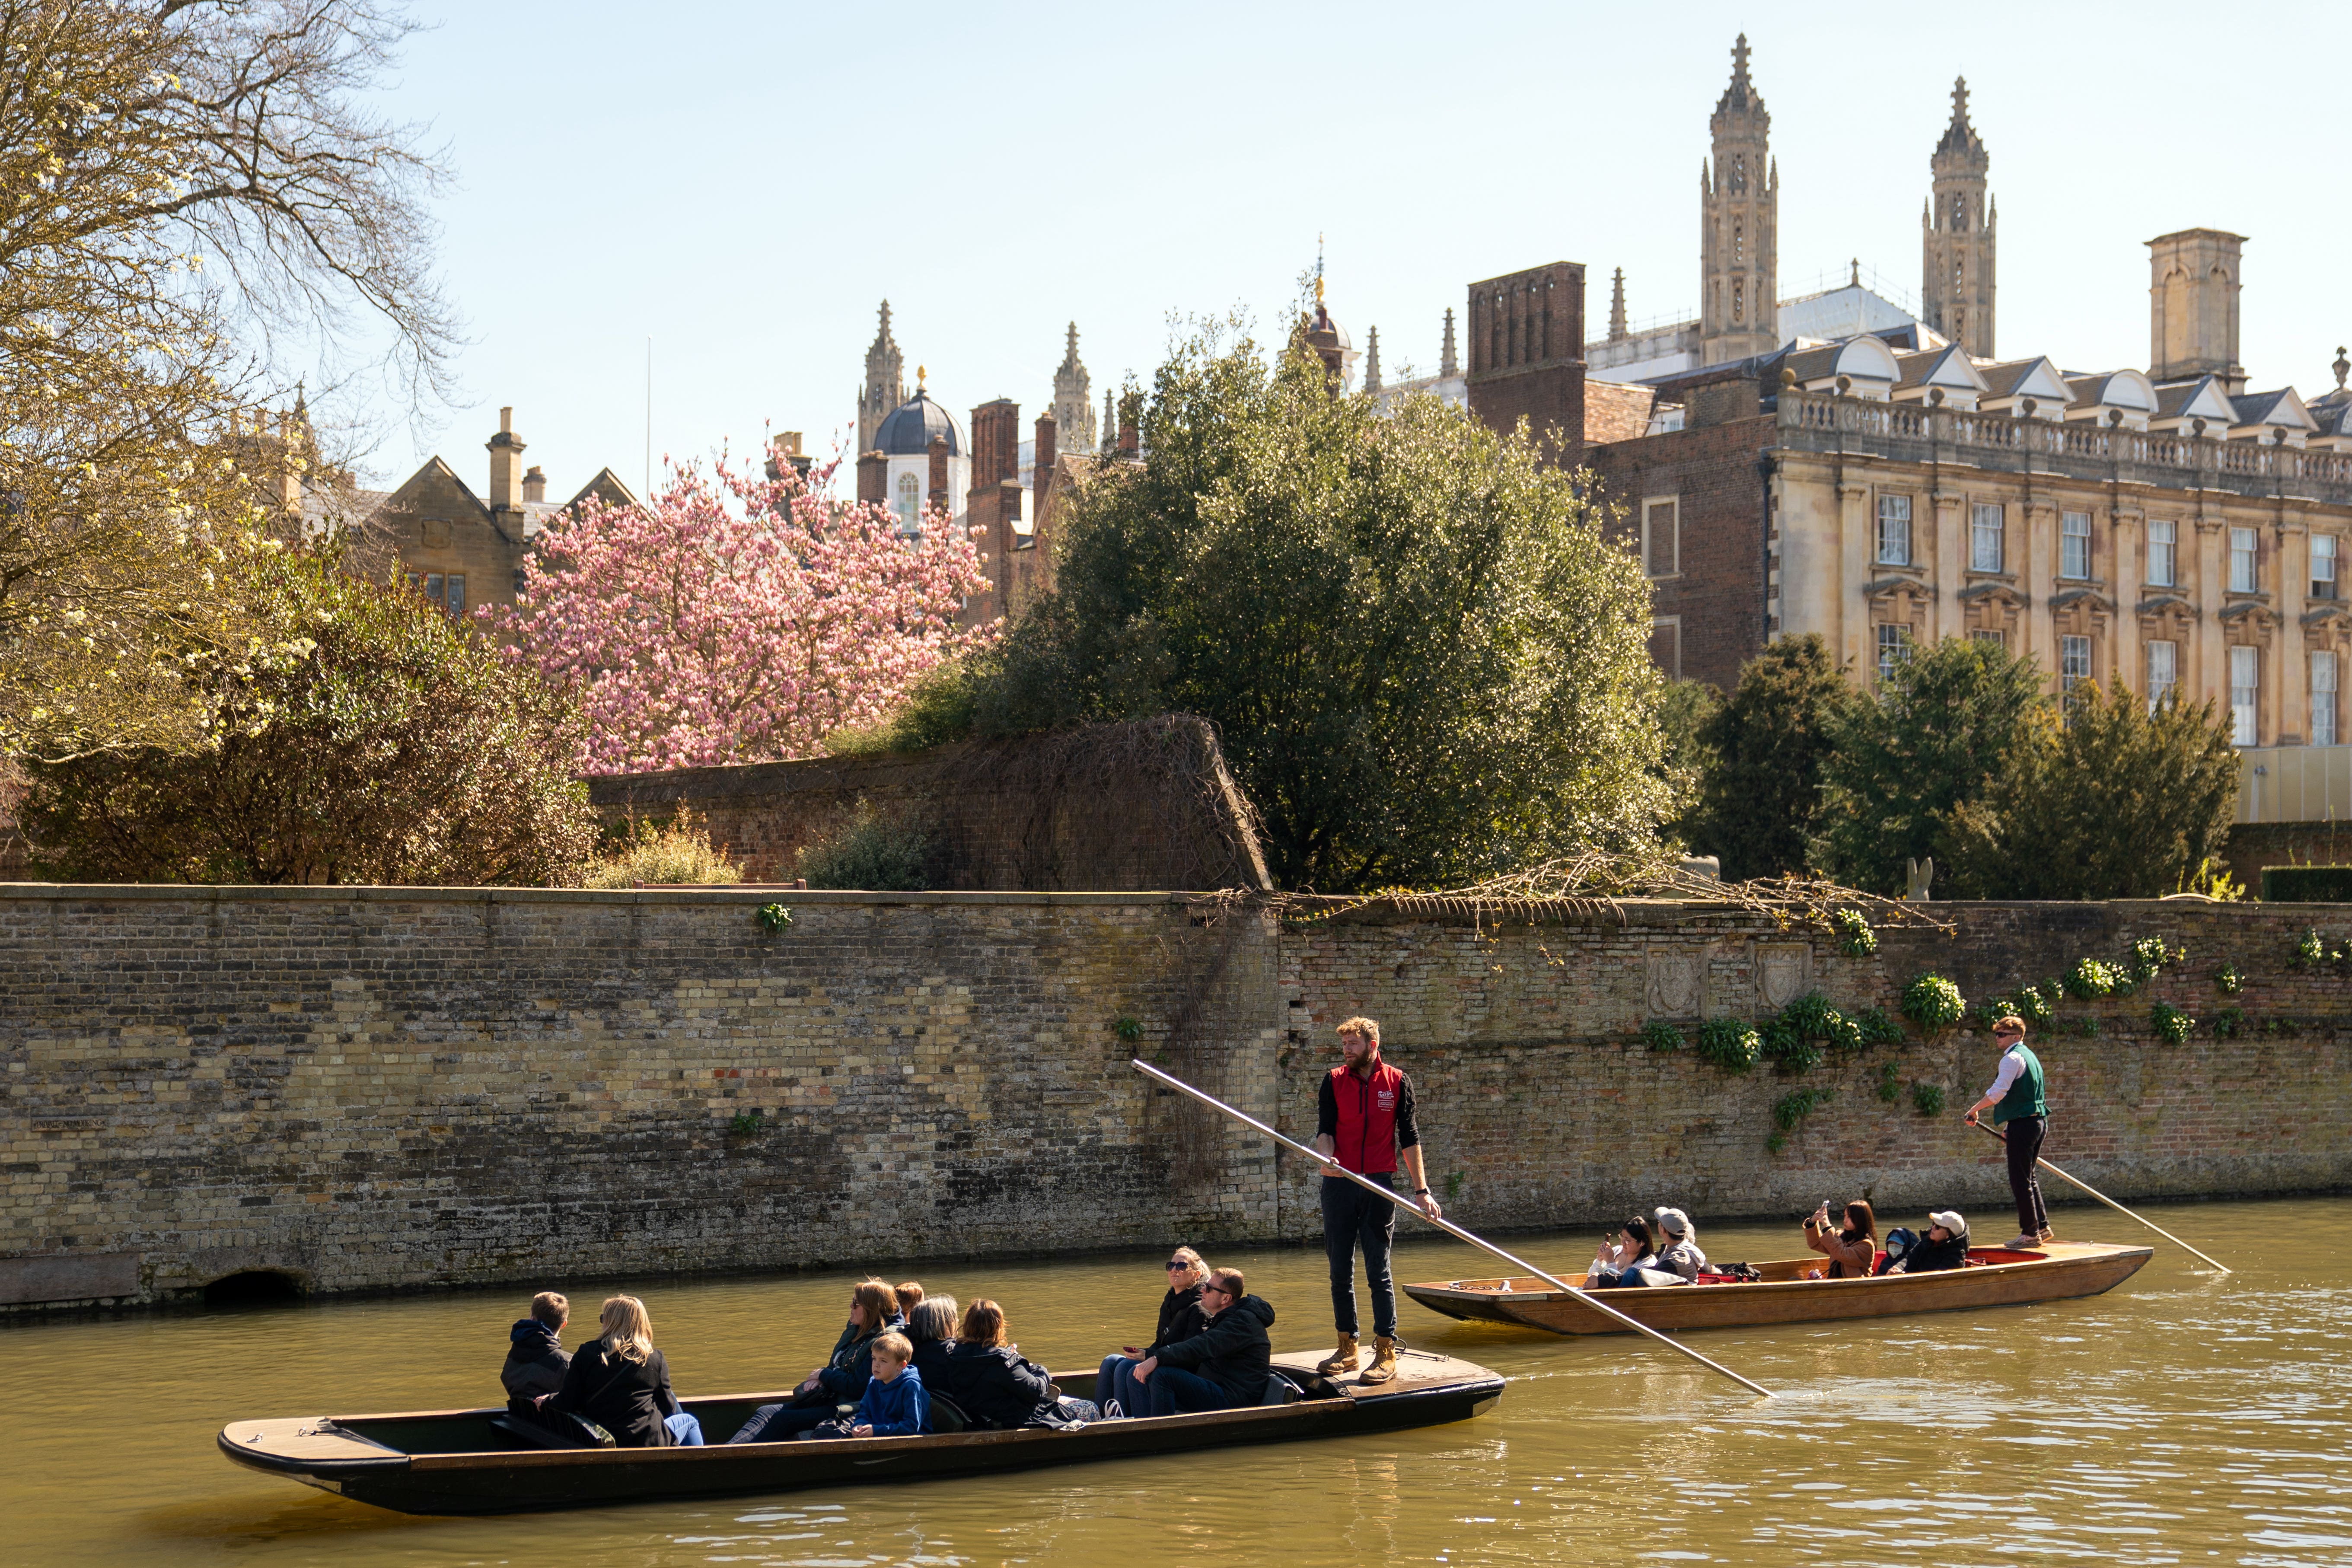 People enjoy a punt tour past Clare College along the River Cam in Cambridge